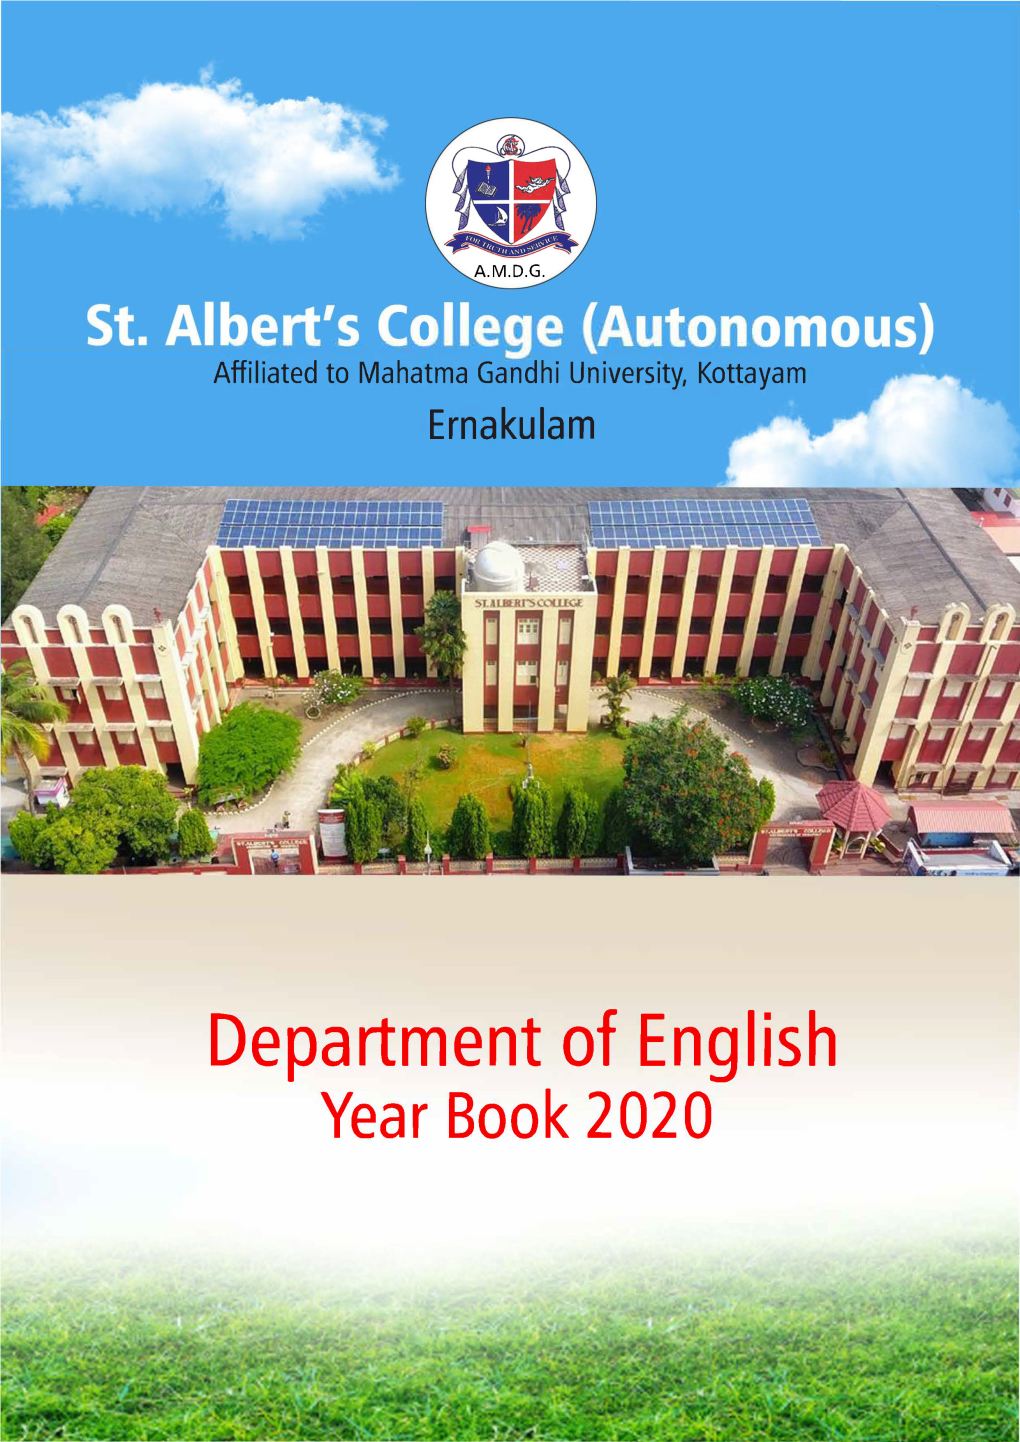 An Exhaustive Gold Mine of Everything You Need to Know About the English Department